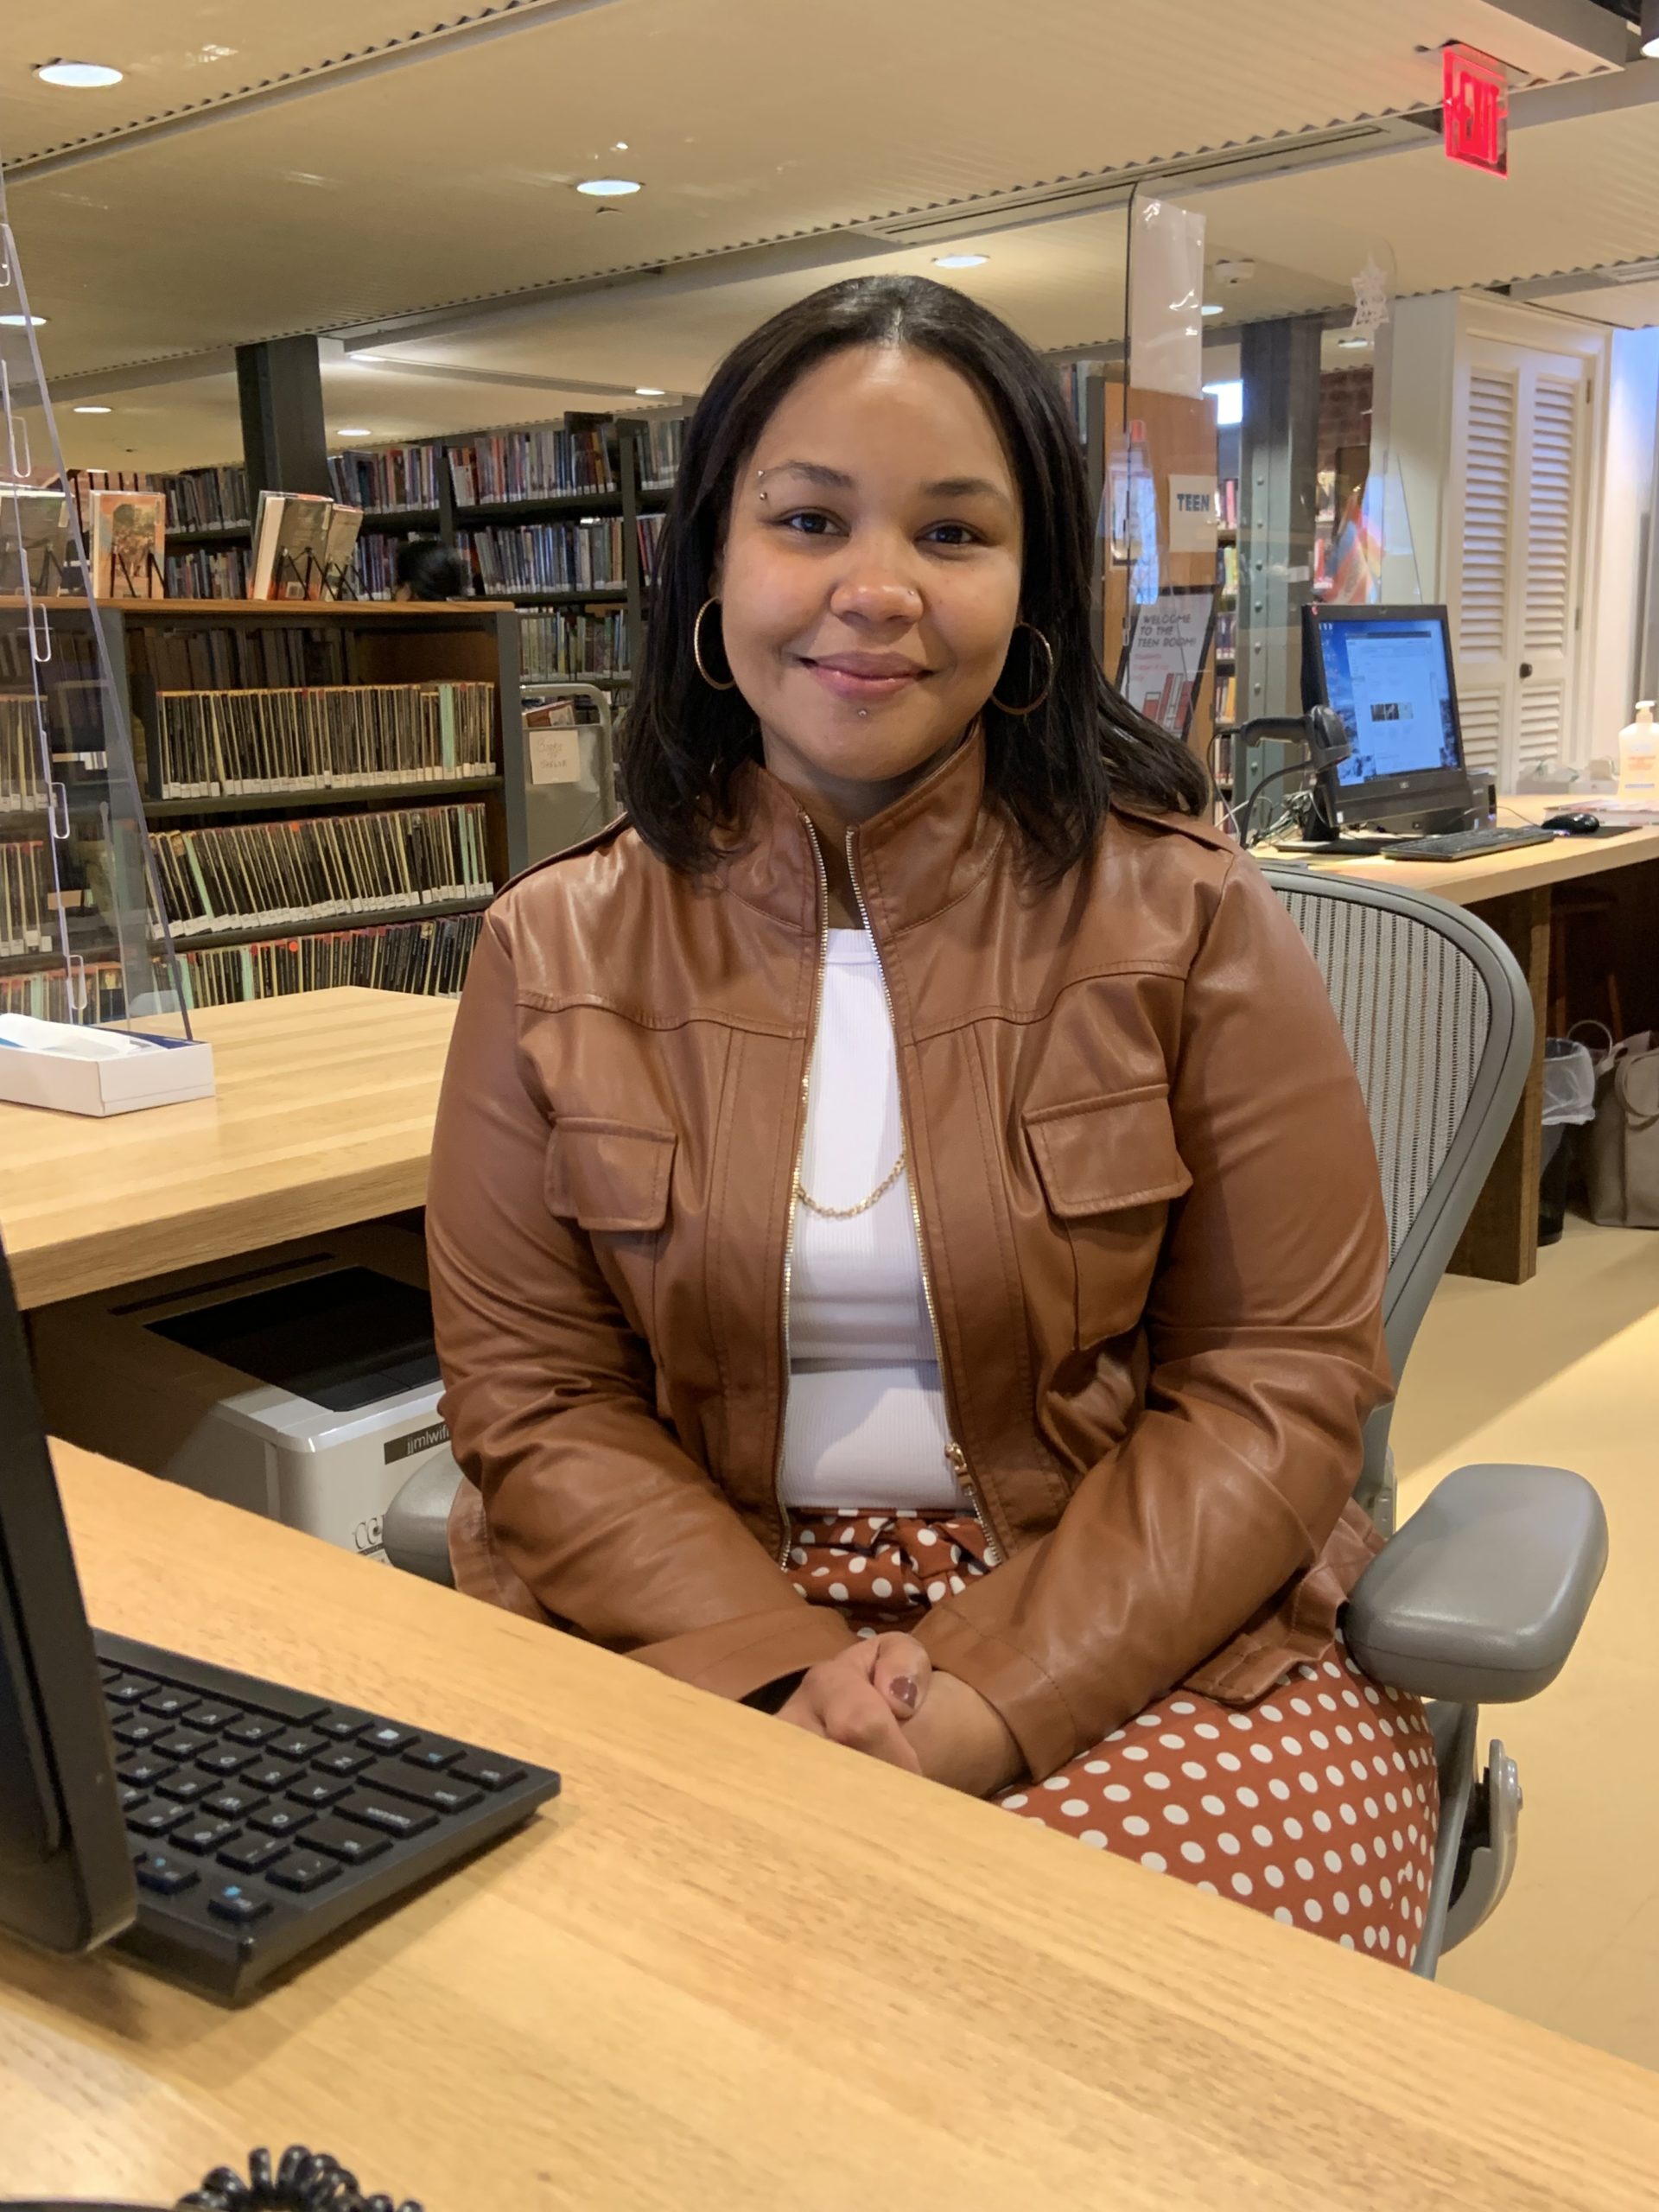 Nancy Myers, a librarian at the John Jermain Memorial Library in Sag Harbor, has been named the inaugural recipient of the Long Island Library Resources Council's diversity internship. STEPHEN J. KOTZ